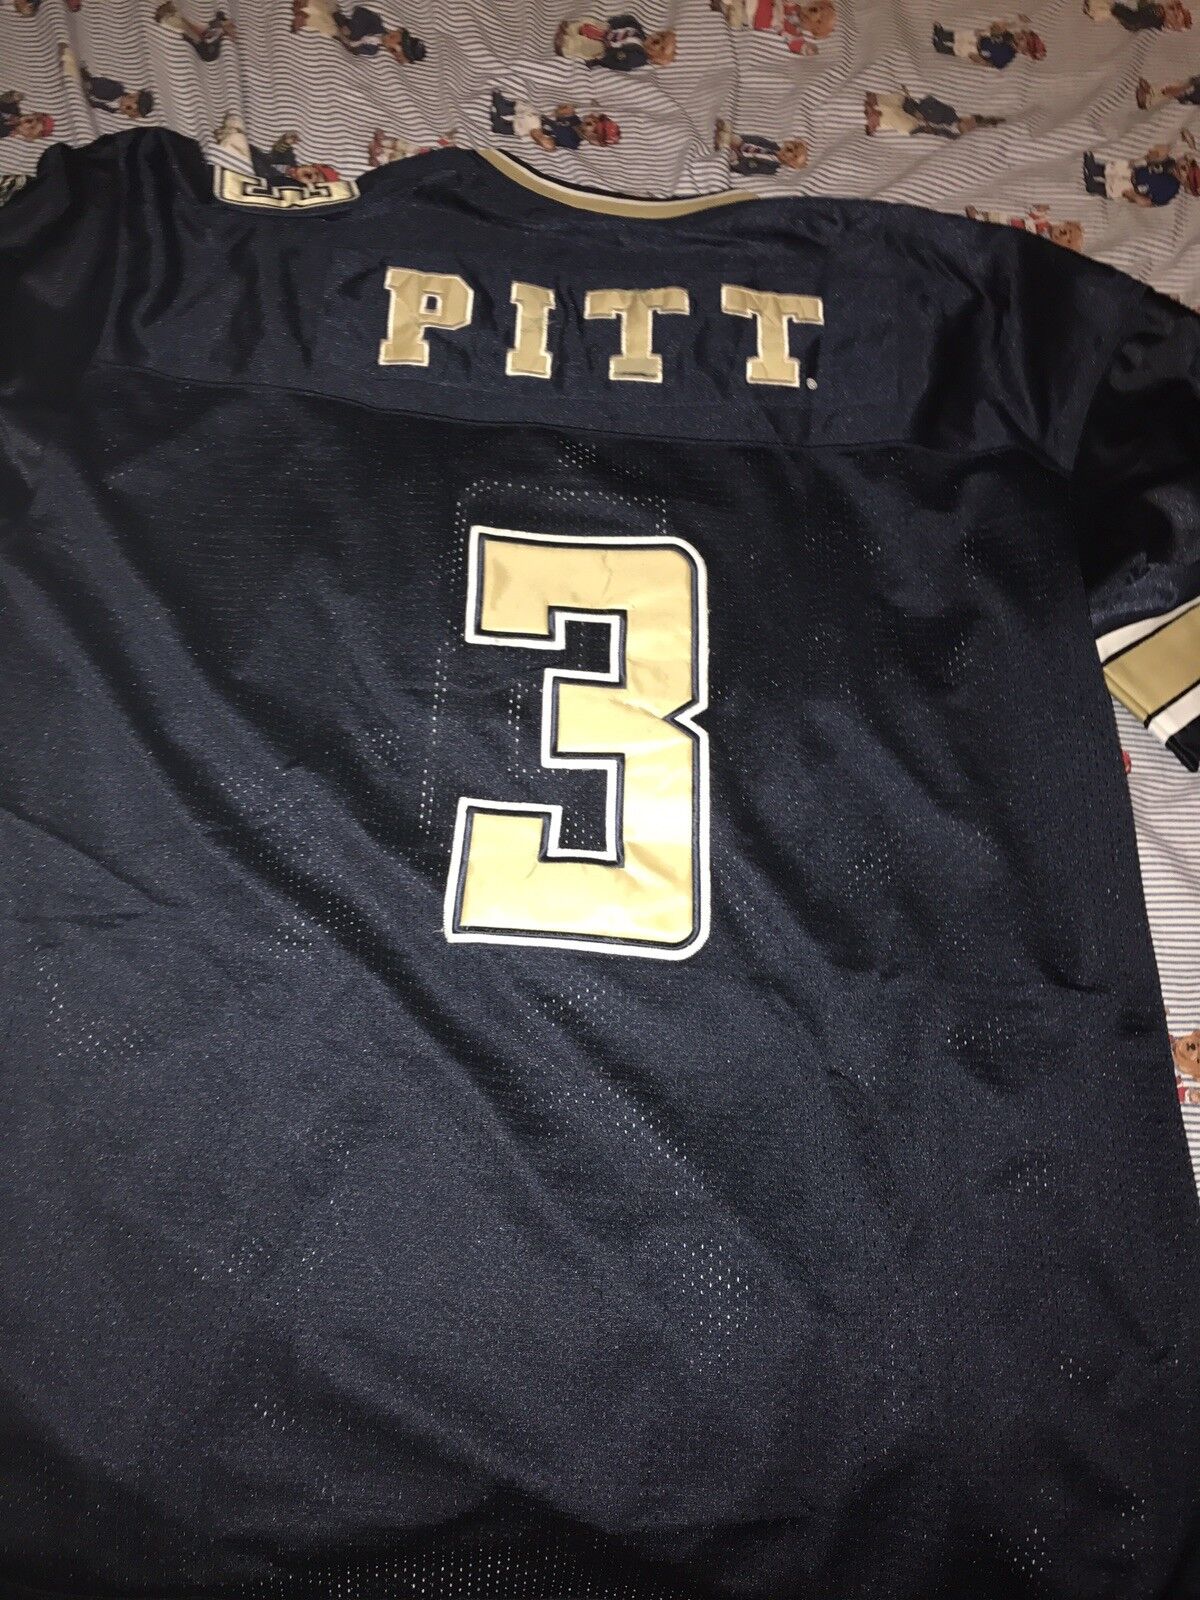 Pittsburgh Panthers Jersey Size Xxl Vintage Ncaa